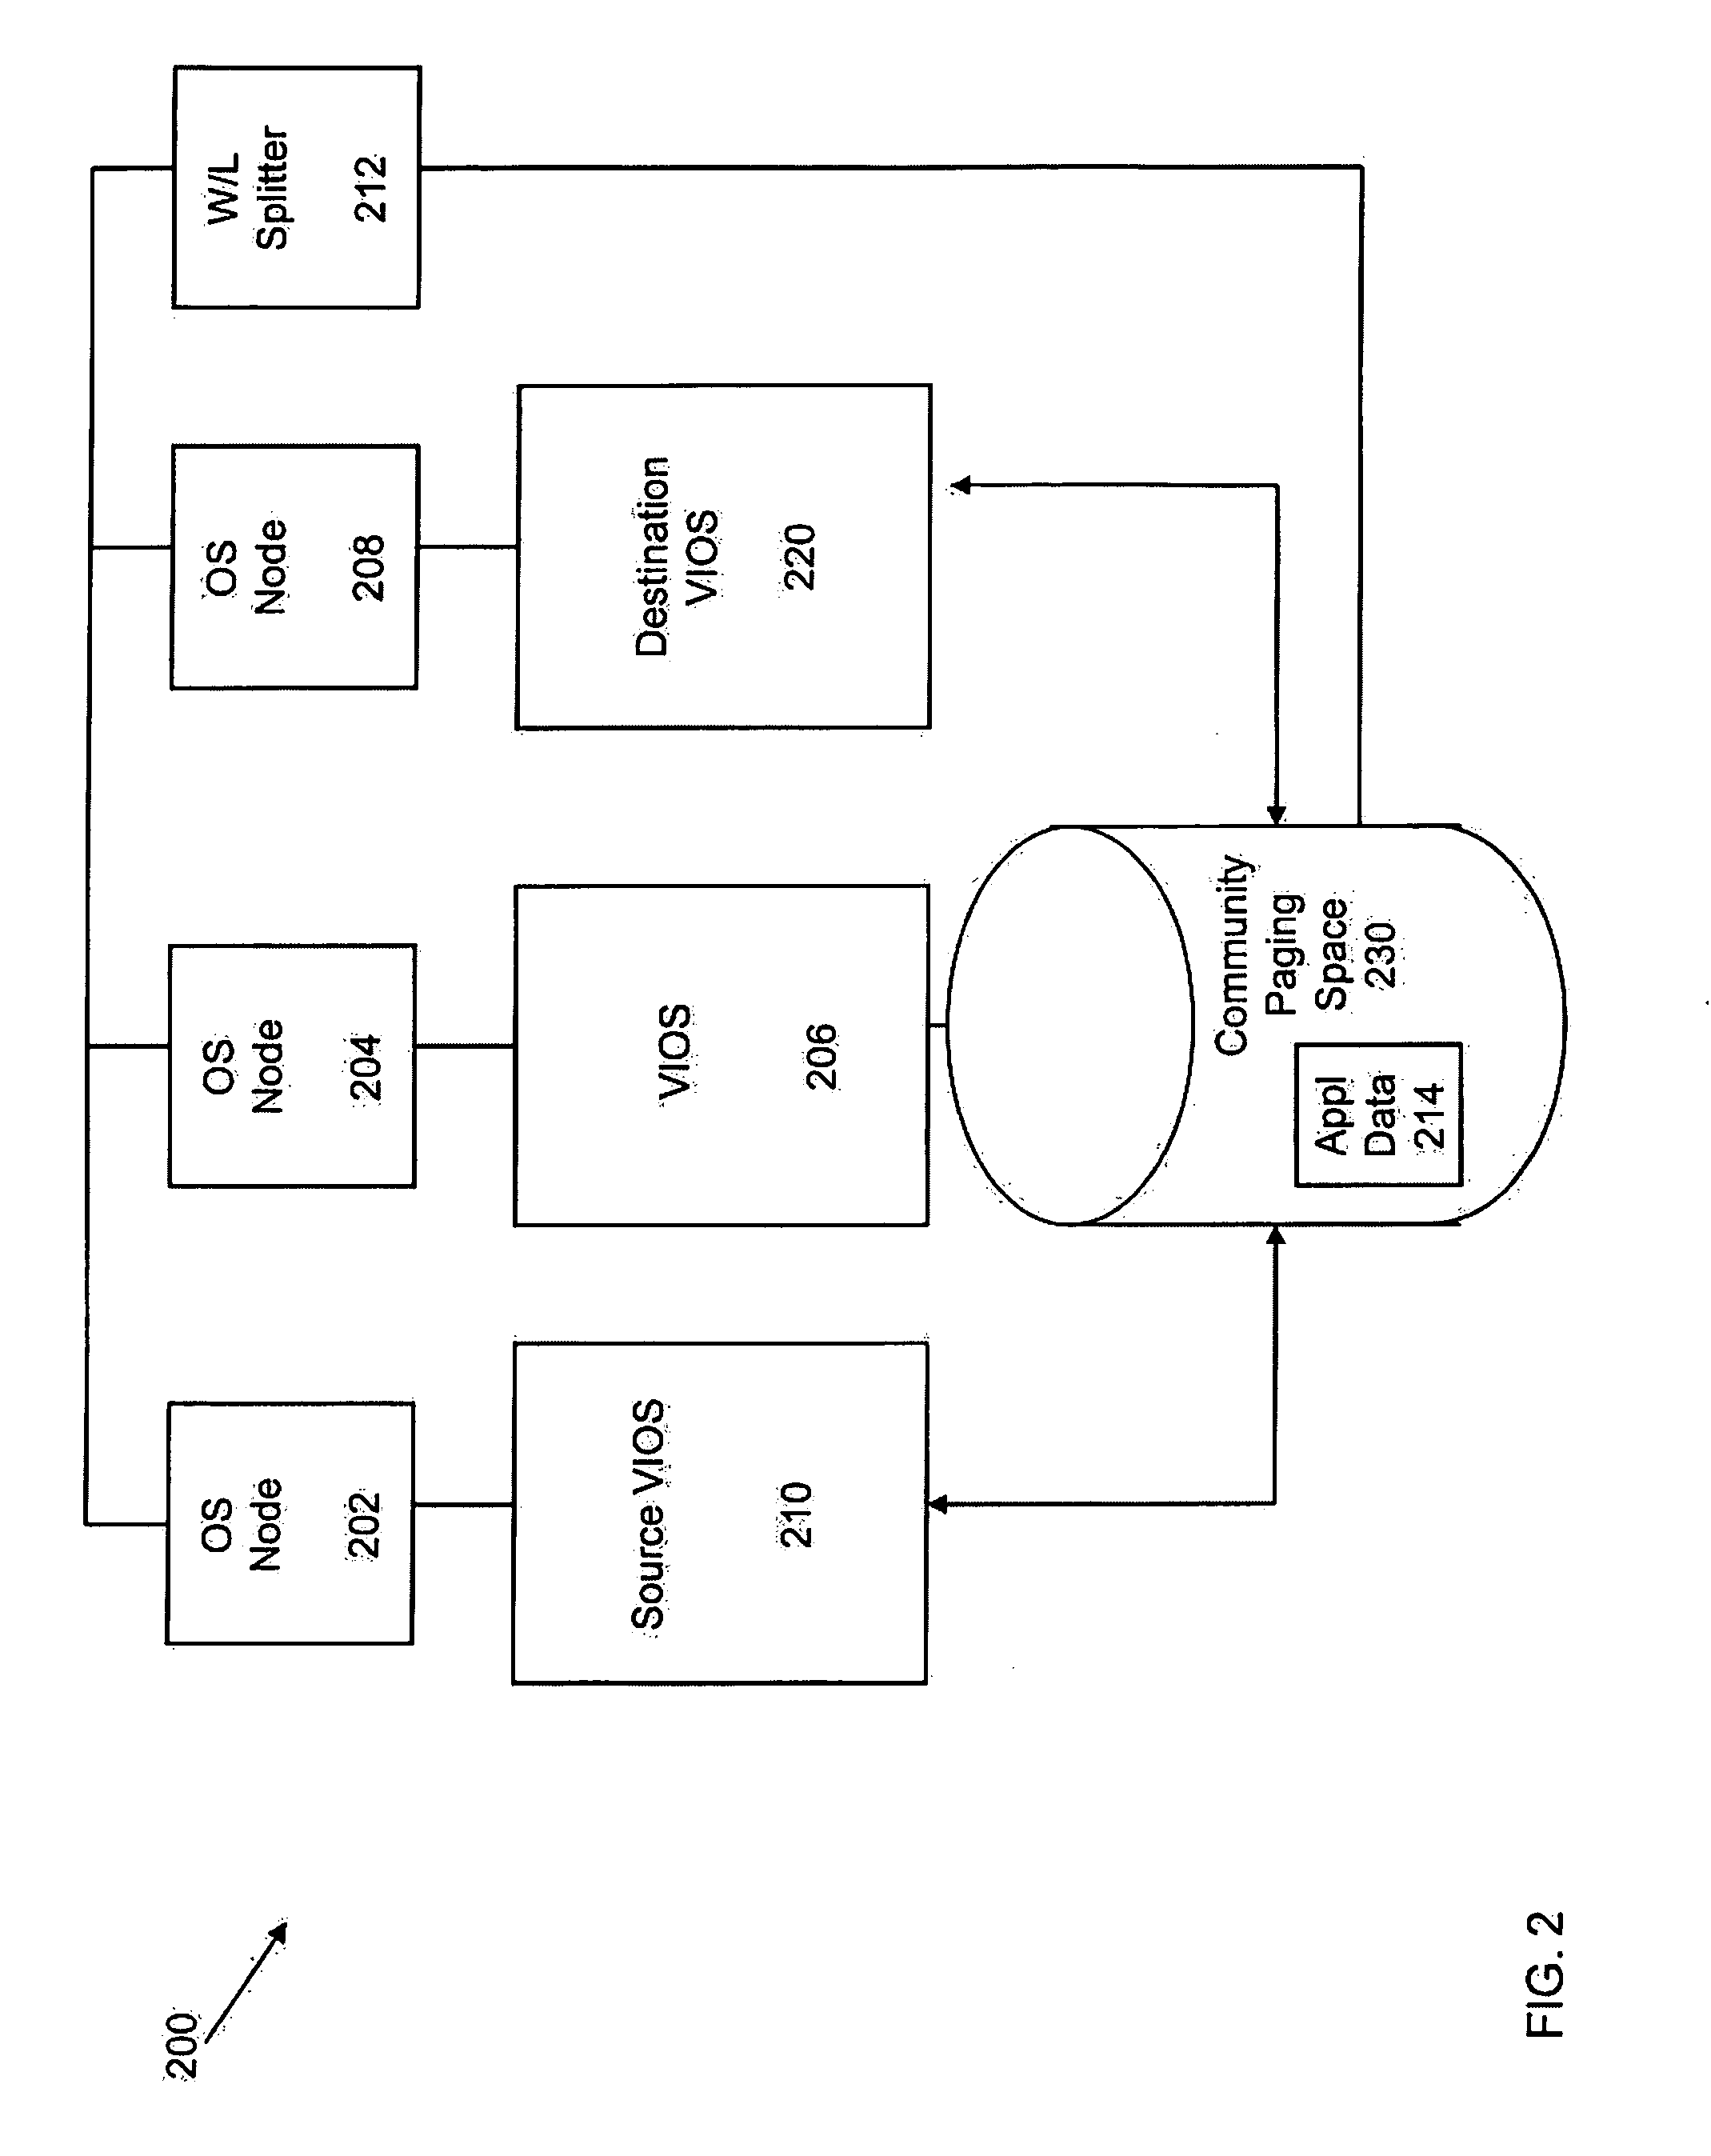 Arrangements for I/O Control in a Virtualized System